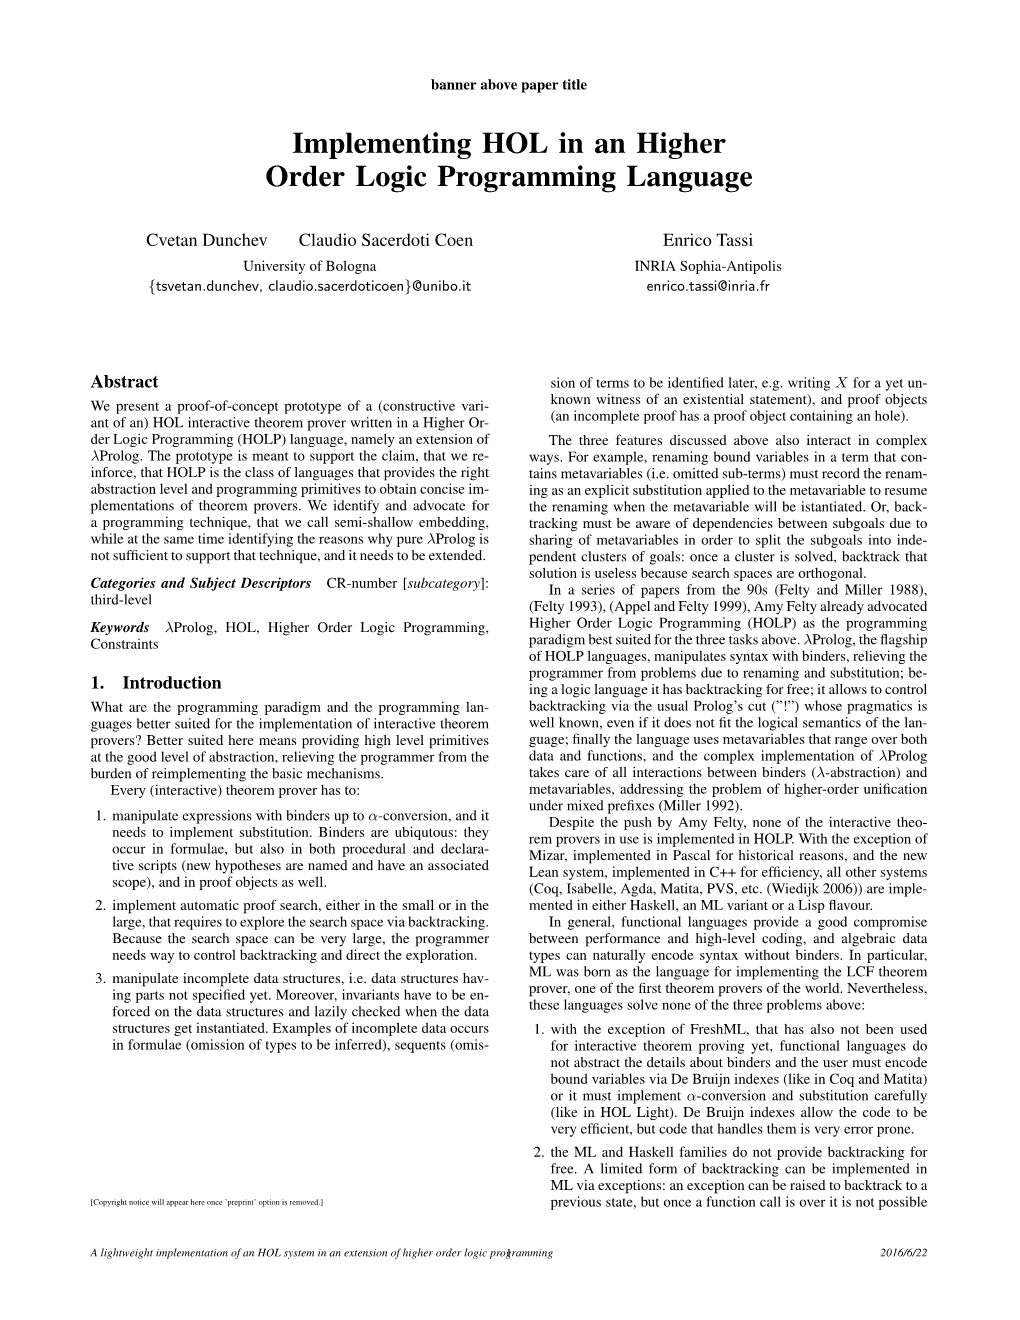 Implementing HOL in an Higher Order Logic Programming Language